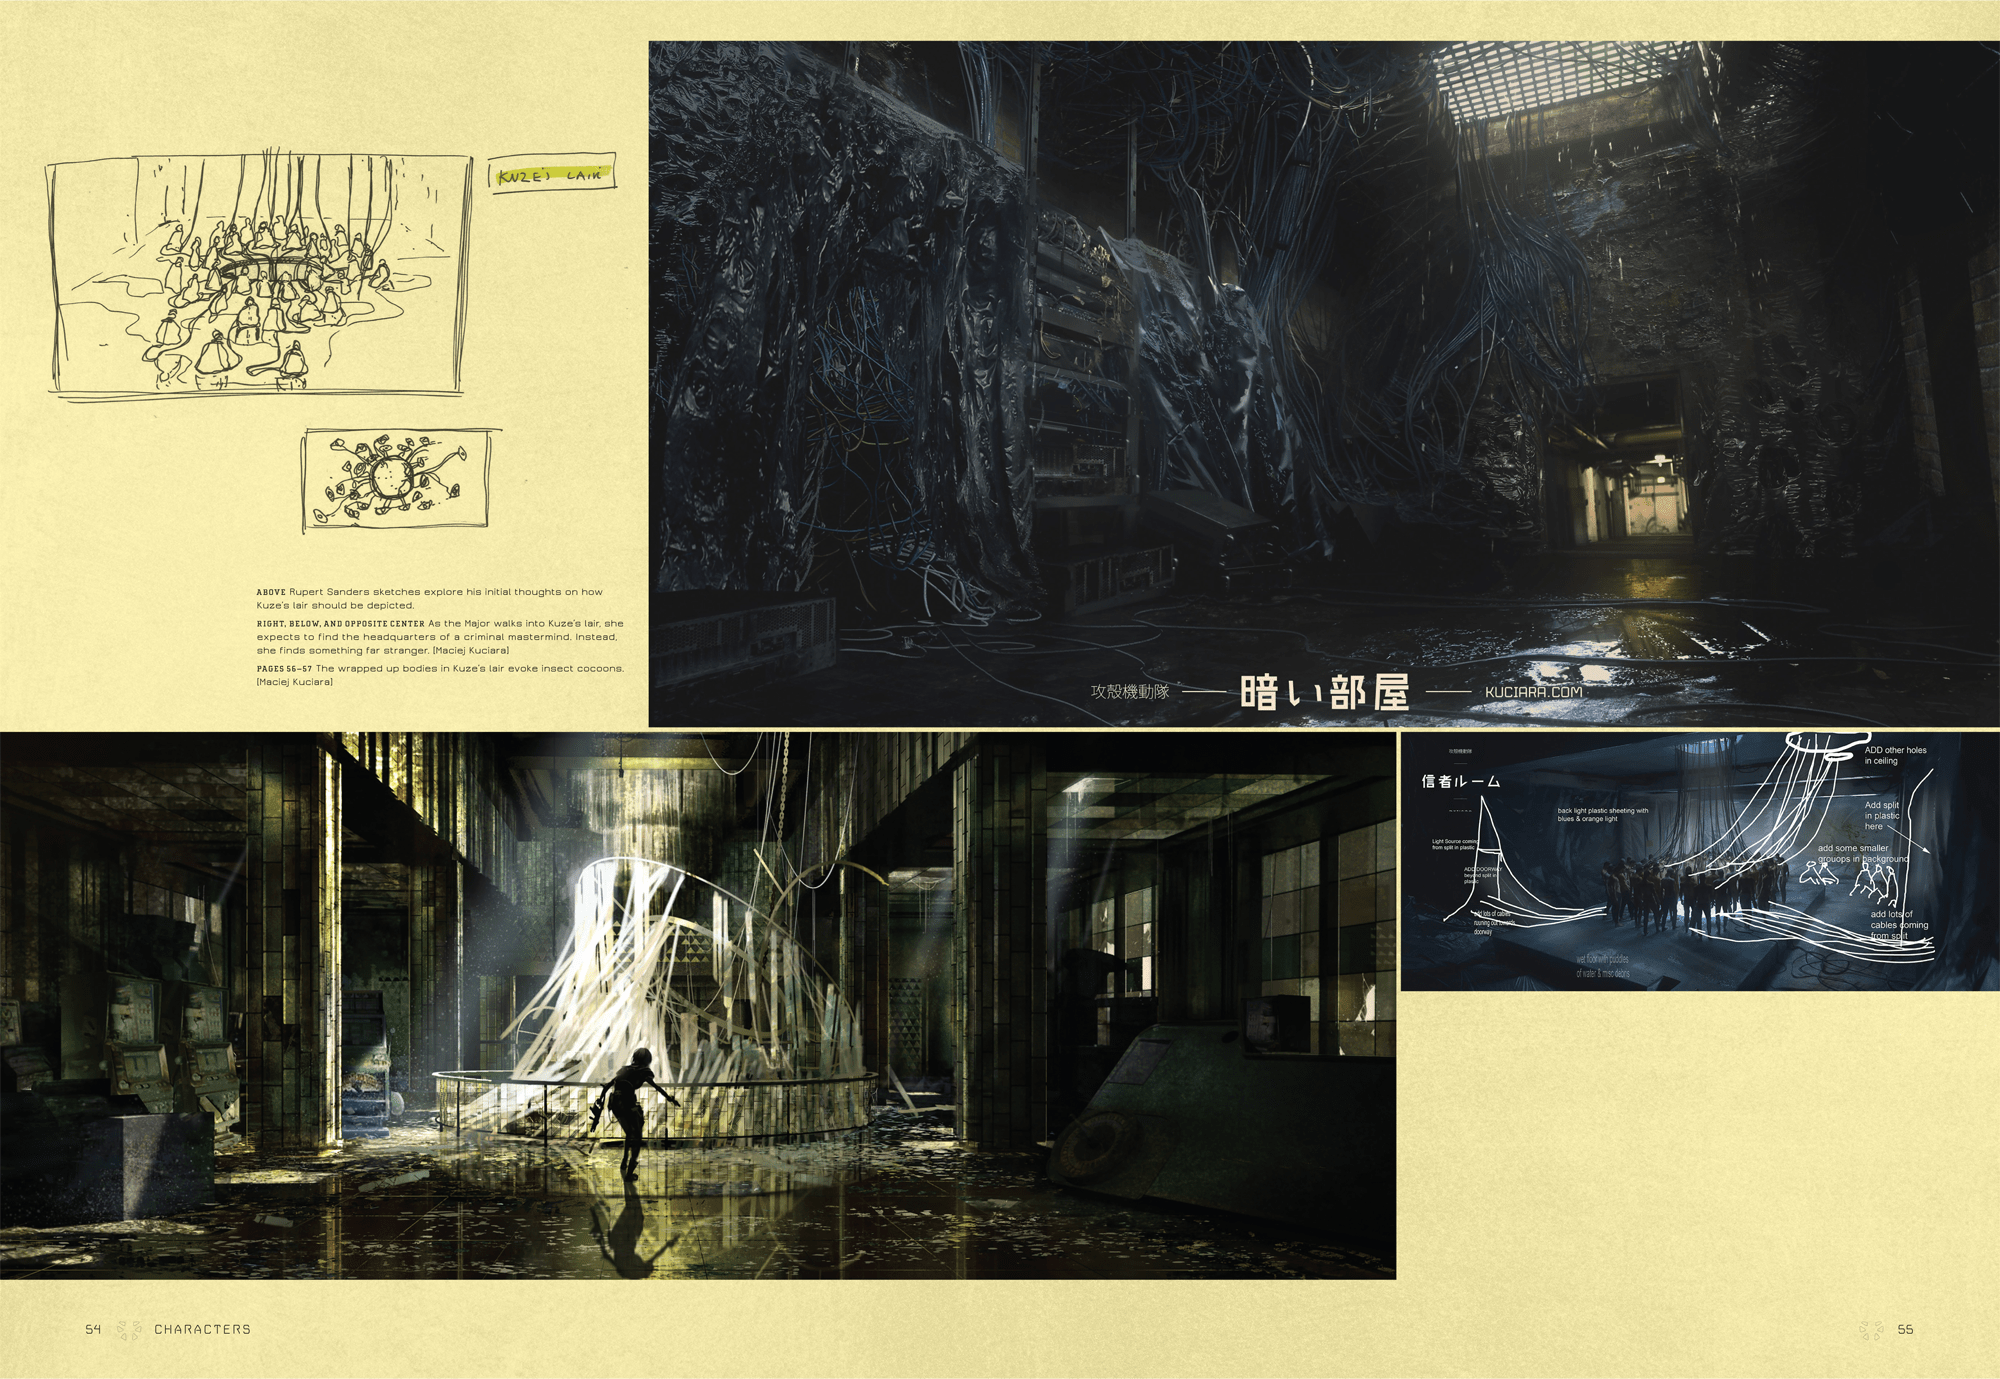 An Exclusive Look At The Art Behind The Ghost In The Shell Movie